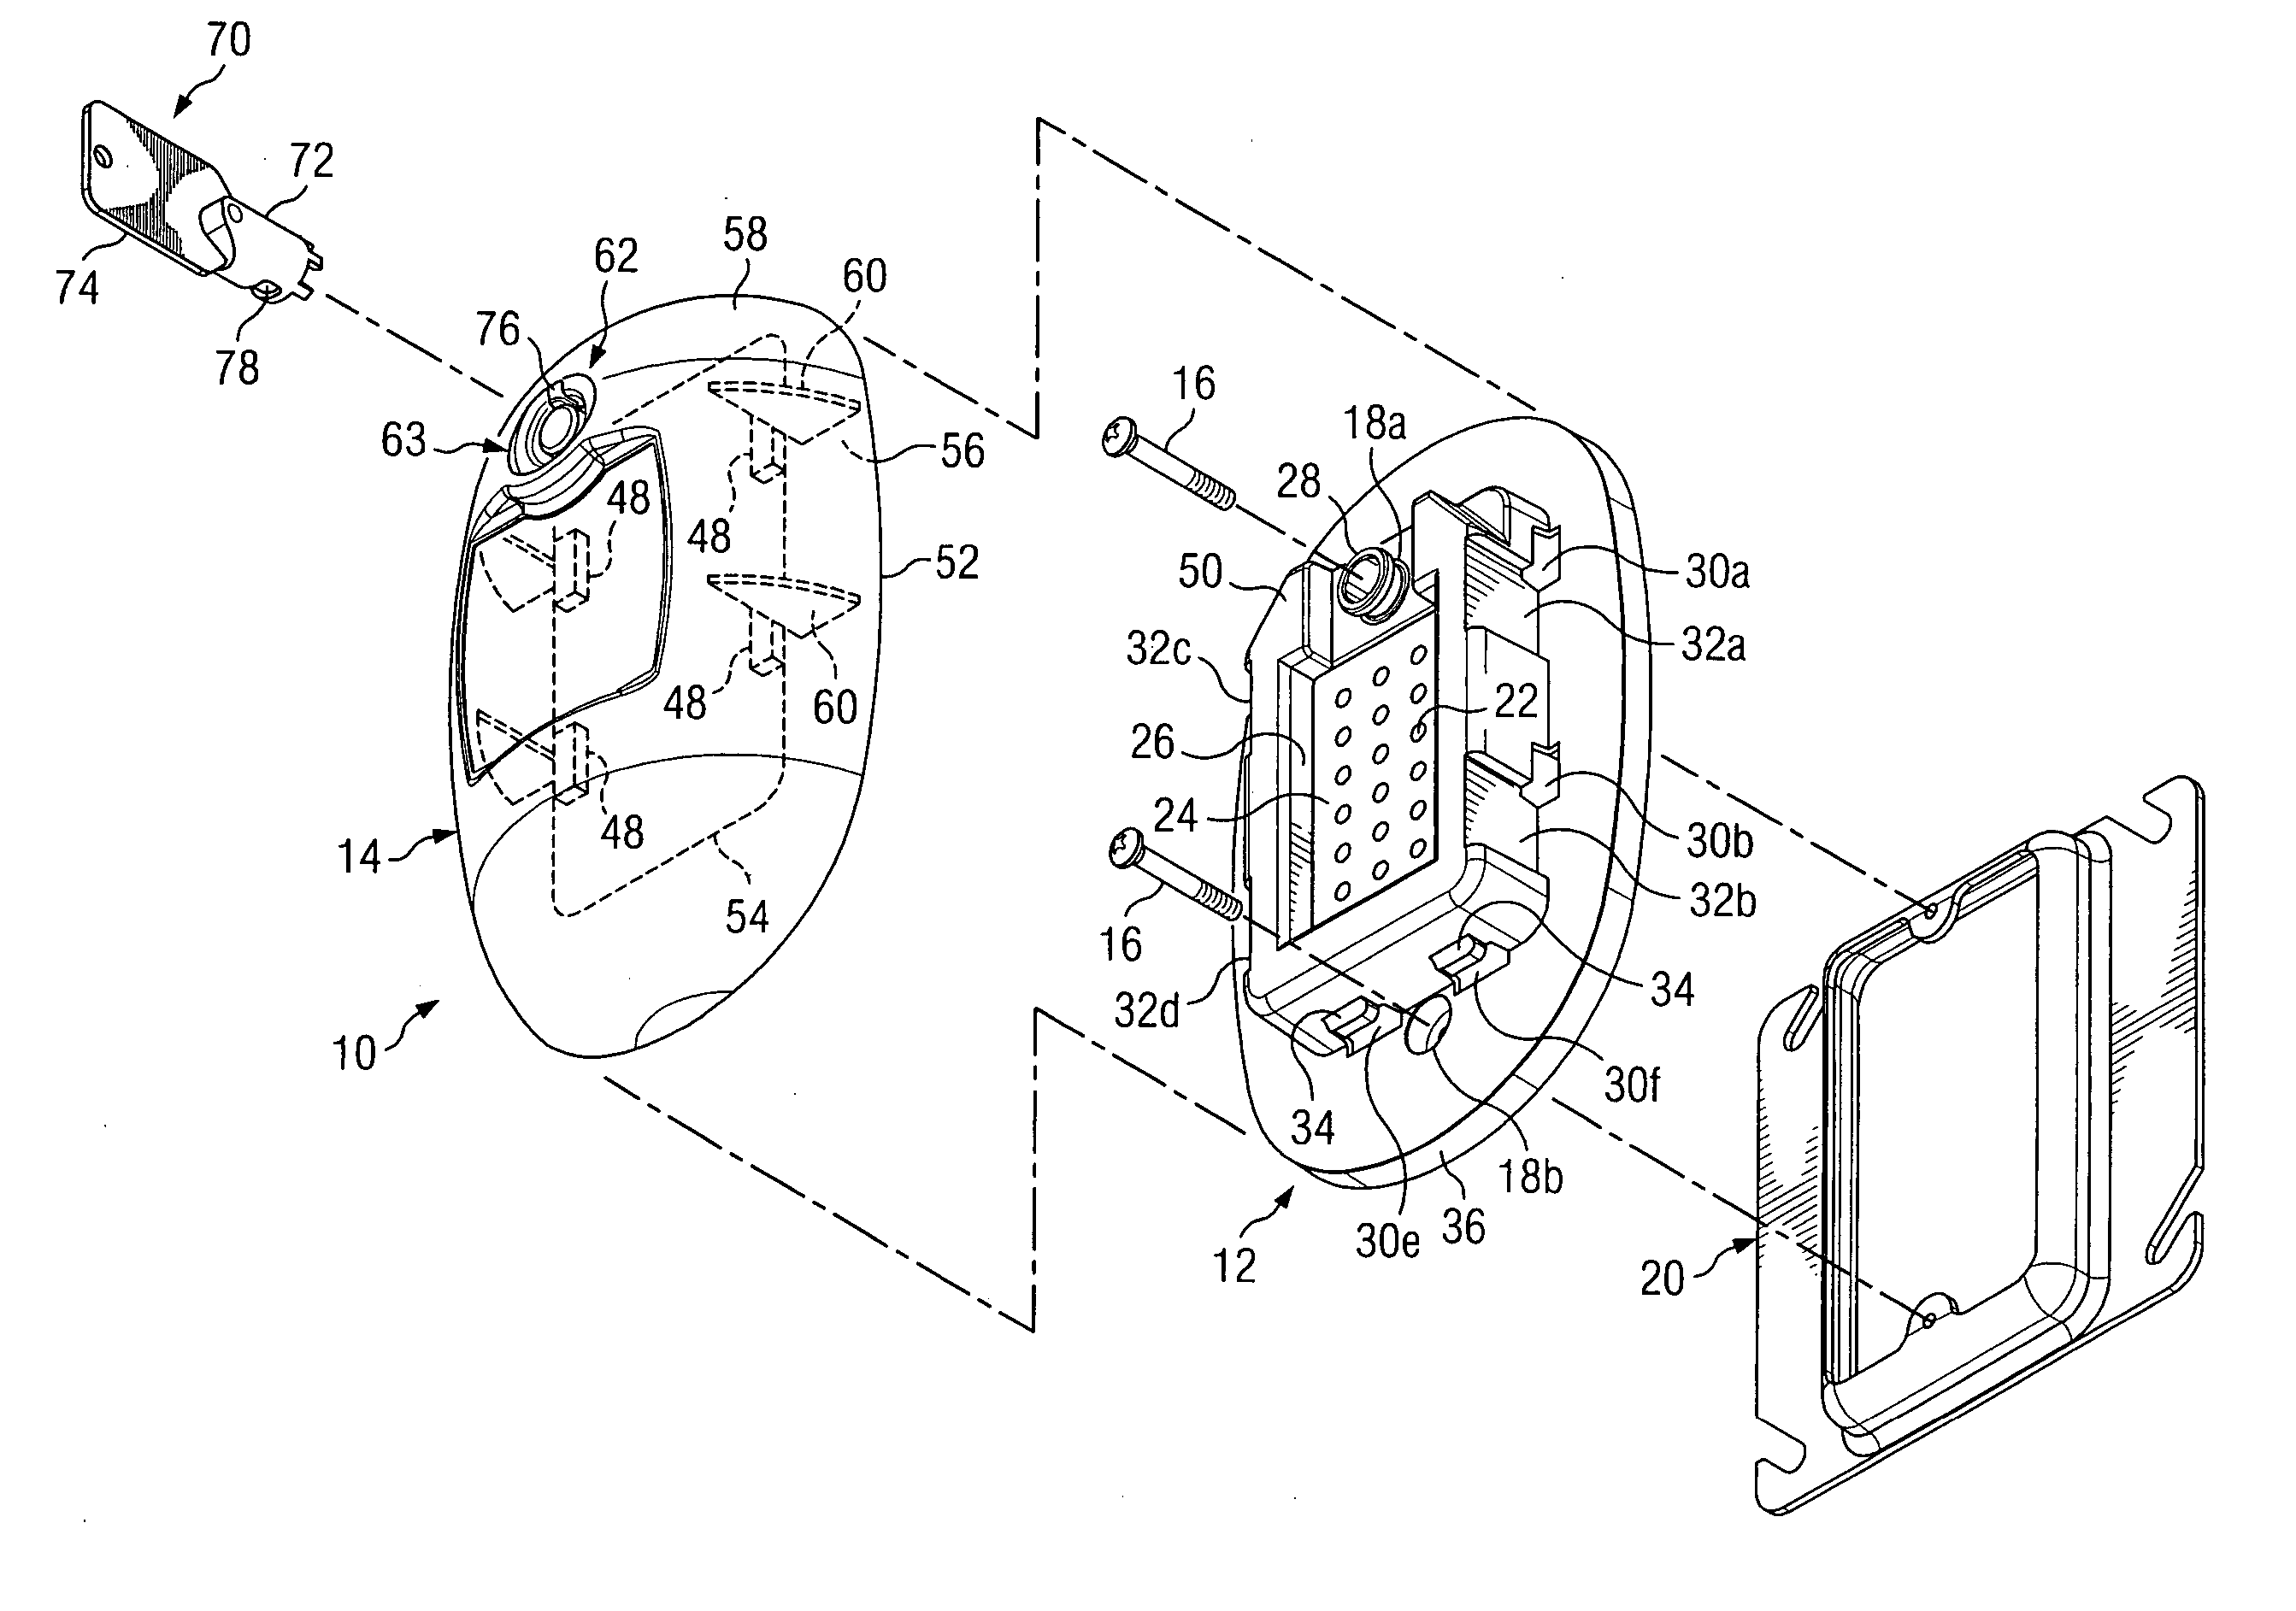 Port cover for a system integrated into a structure for injection of a material into one or more cavities in the structure